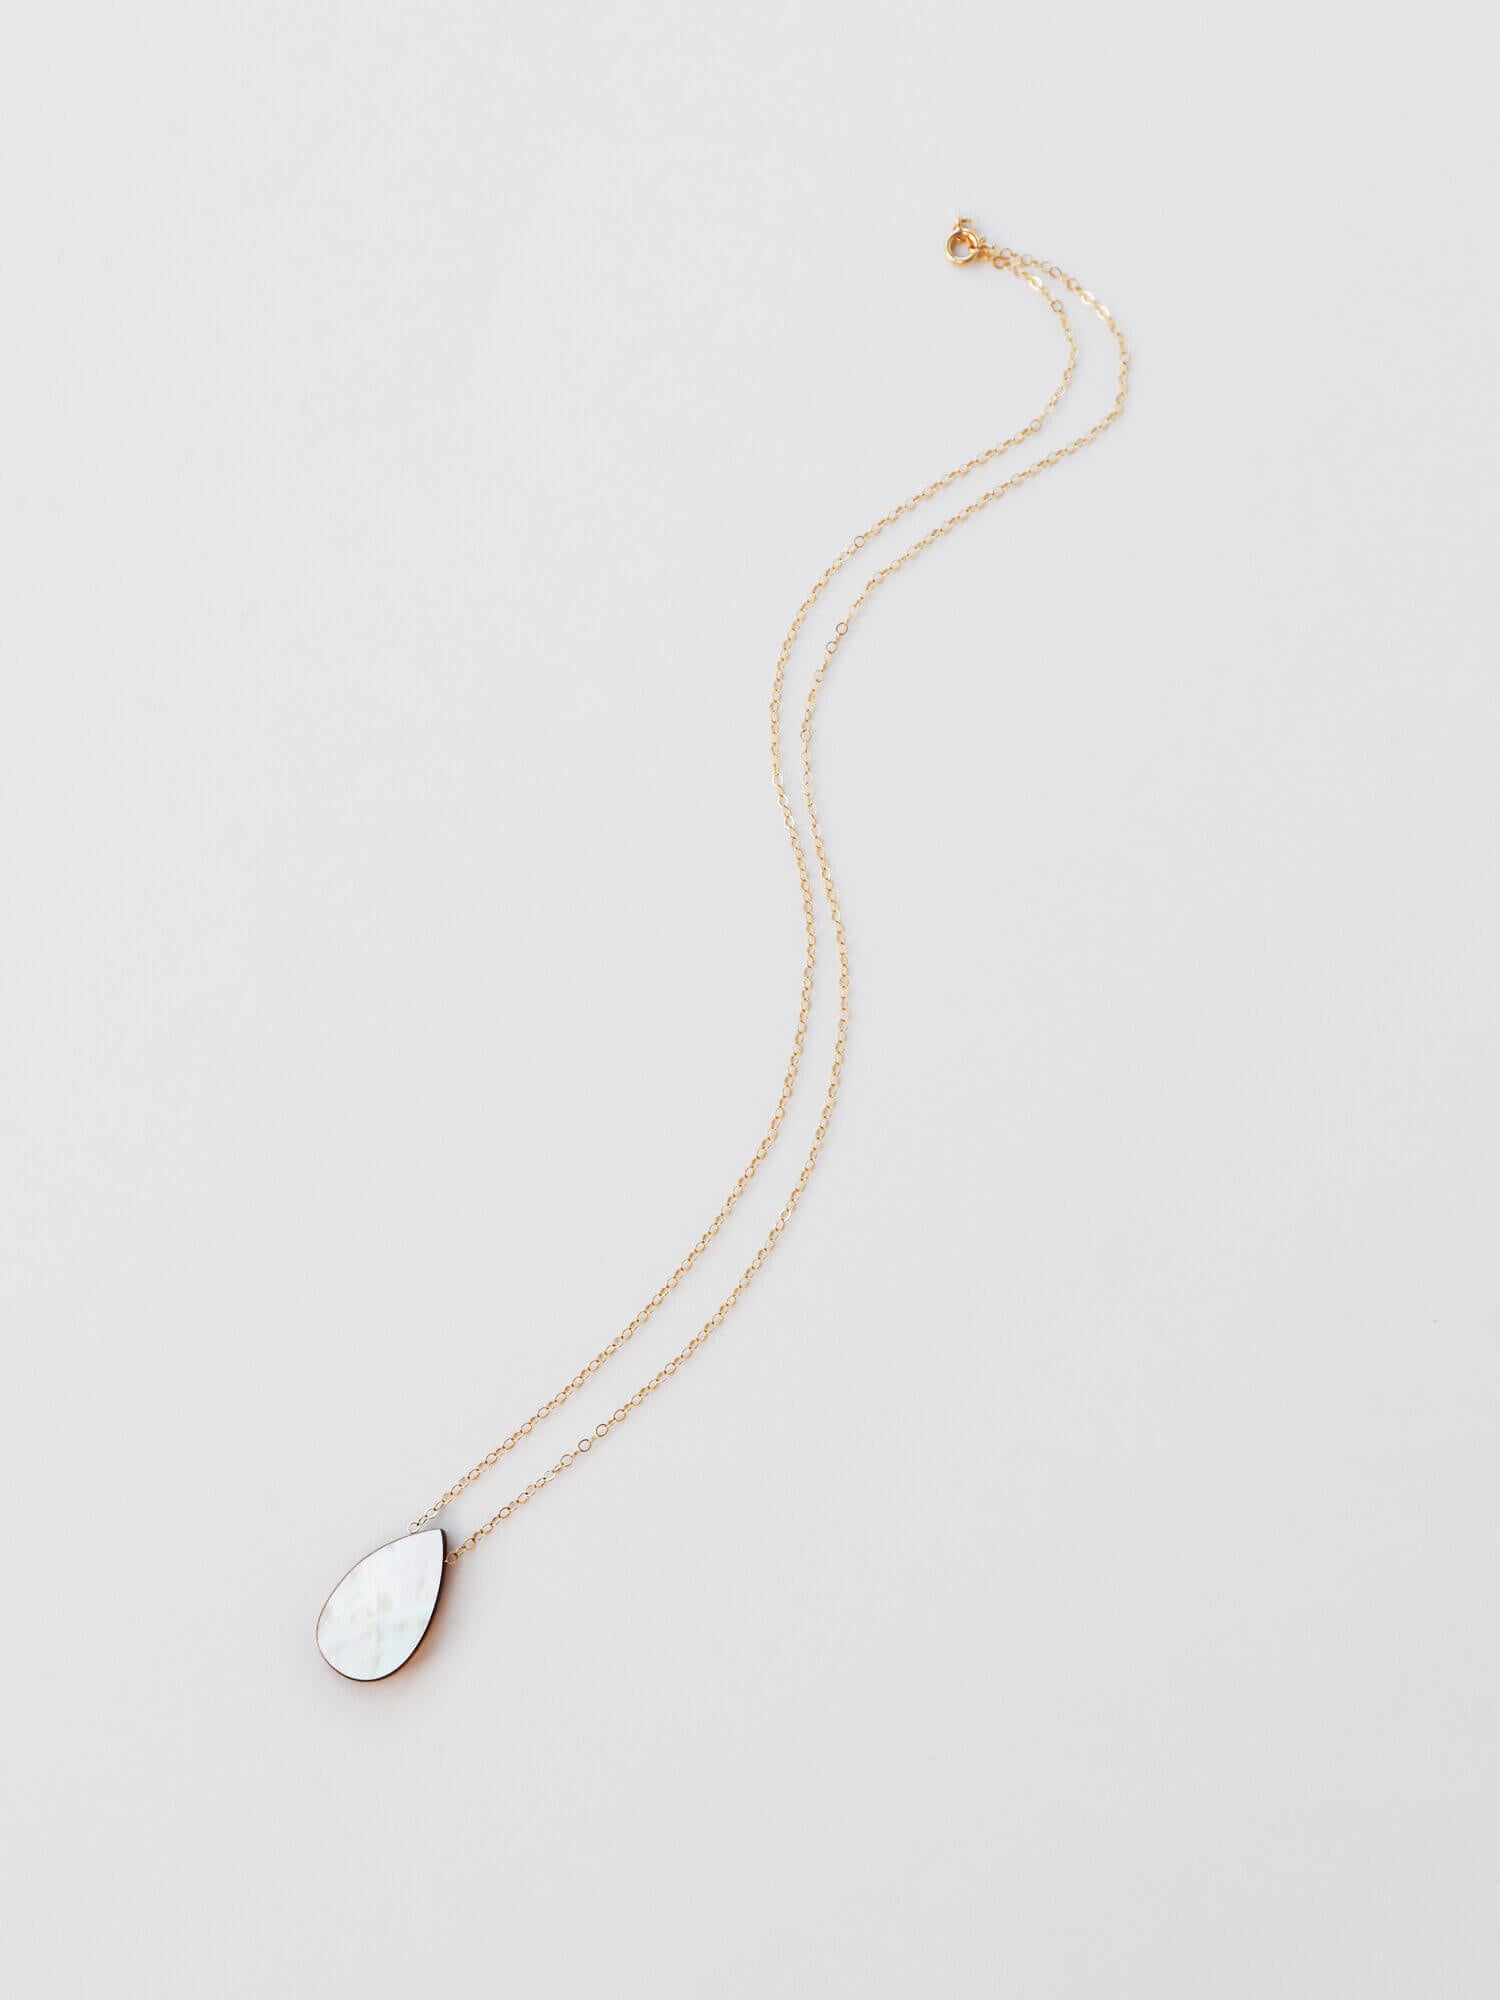 Raindrop Necklace | Cream Mother of Pearl | by Wolf & Moon - Lifestory